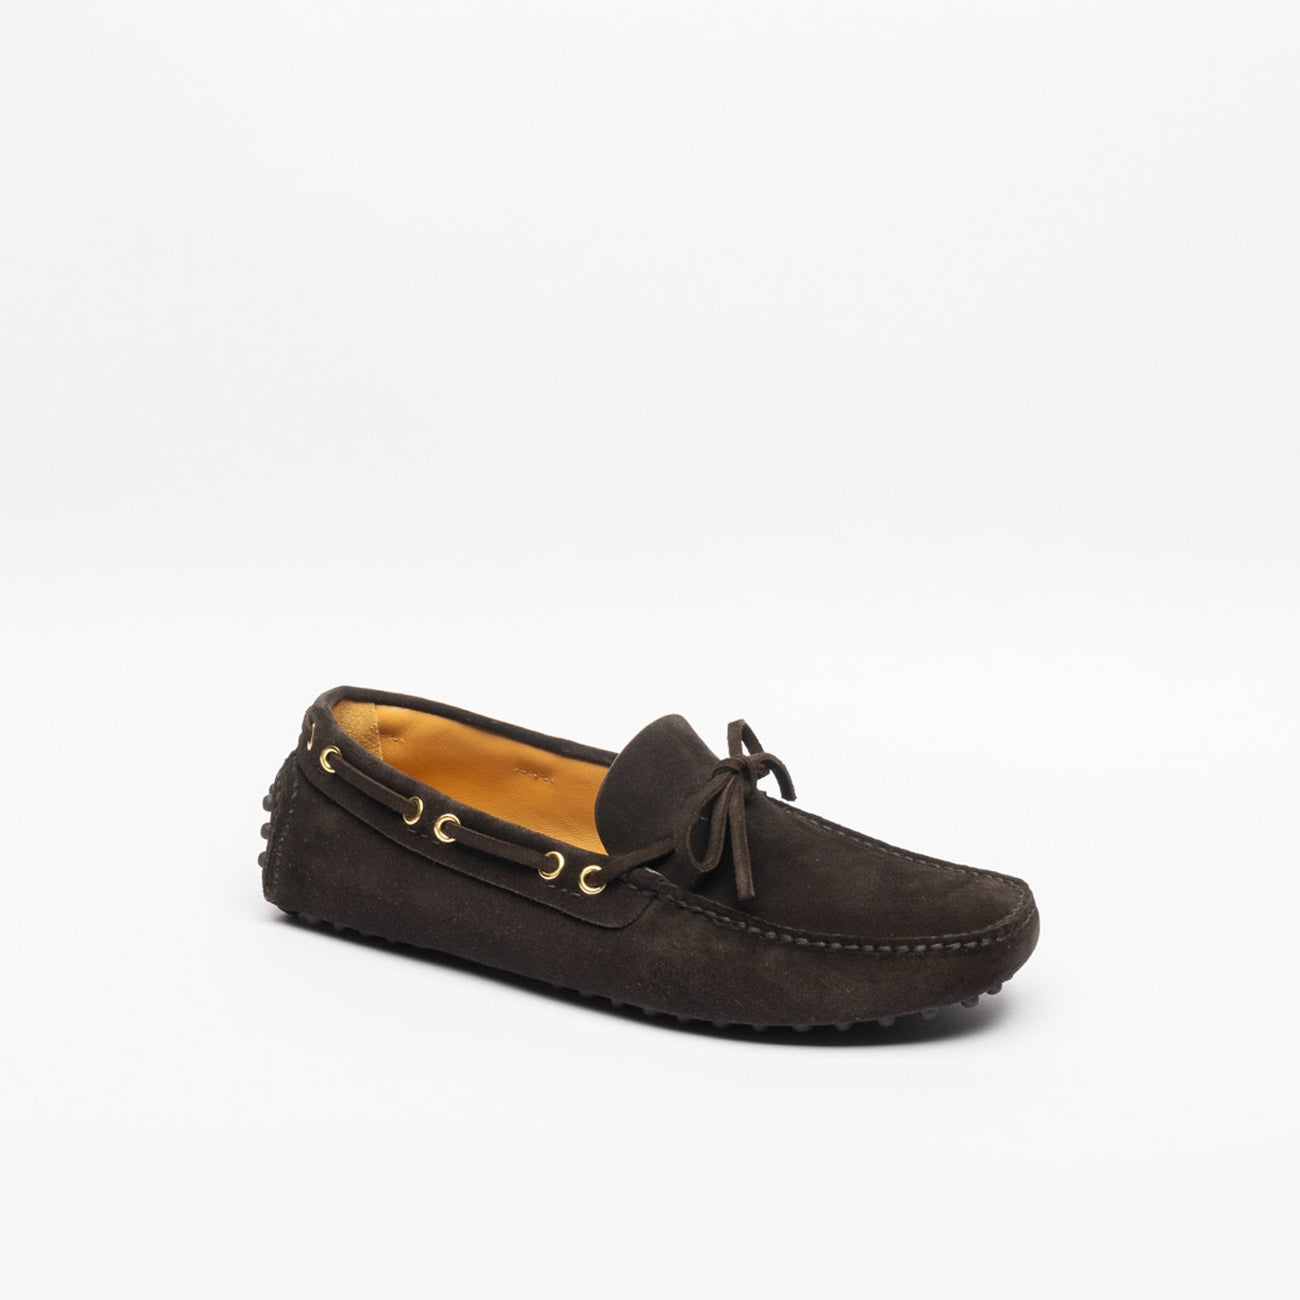 Car Shoe ebano suede driving loafer